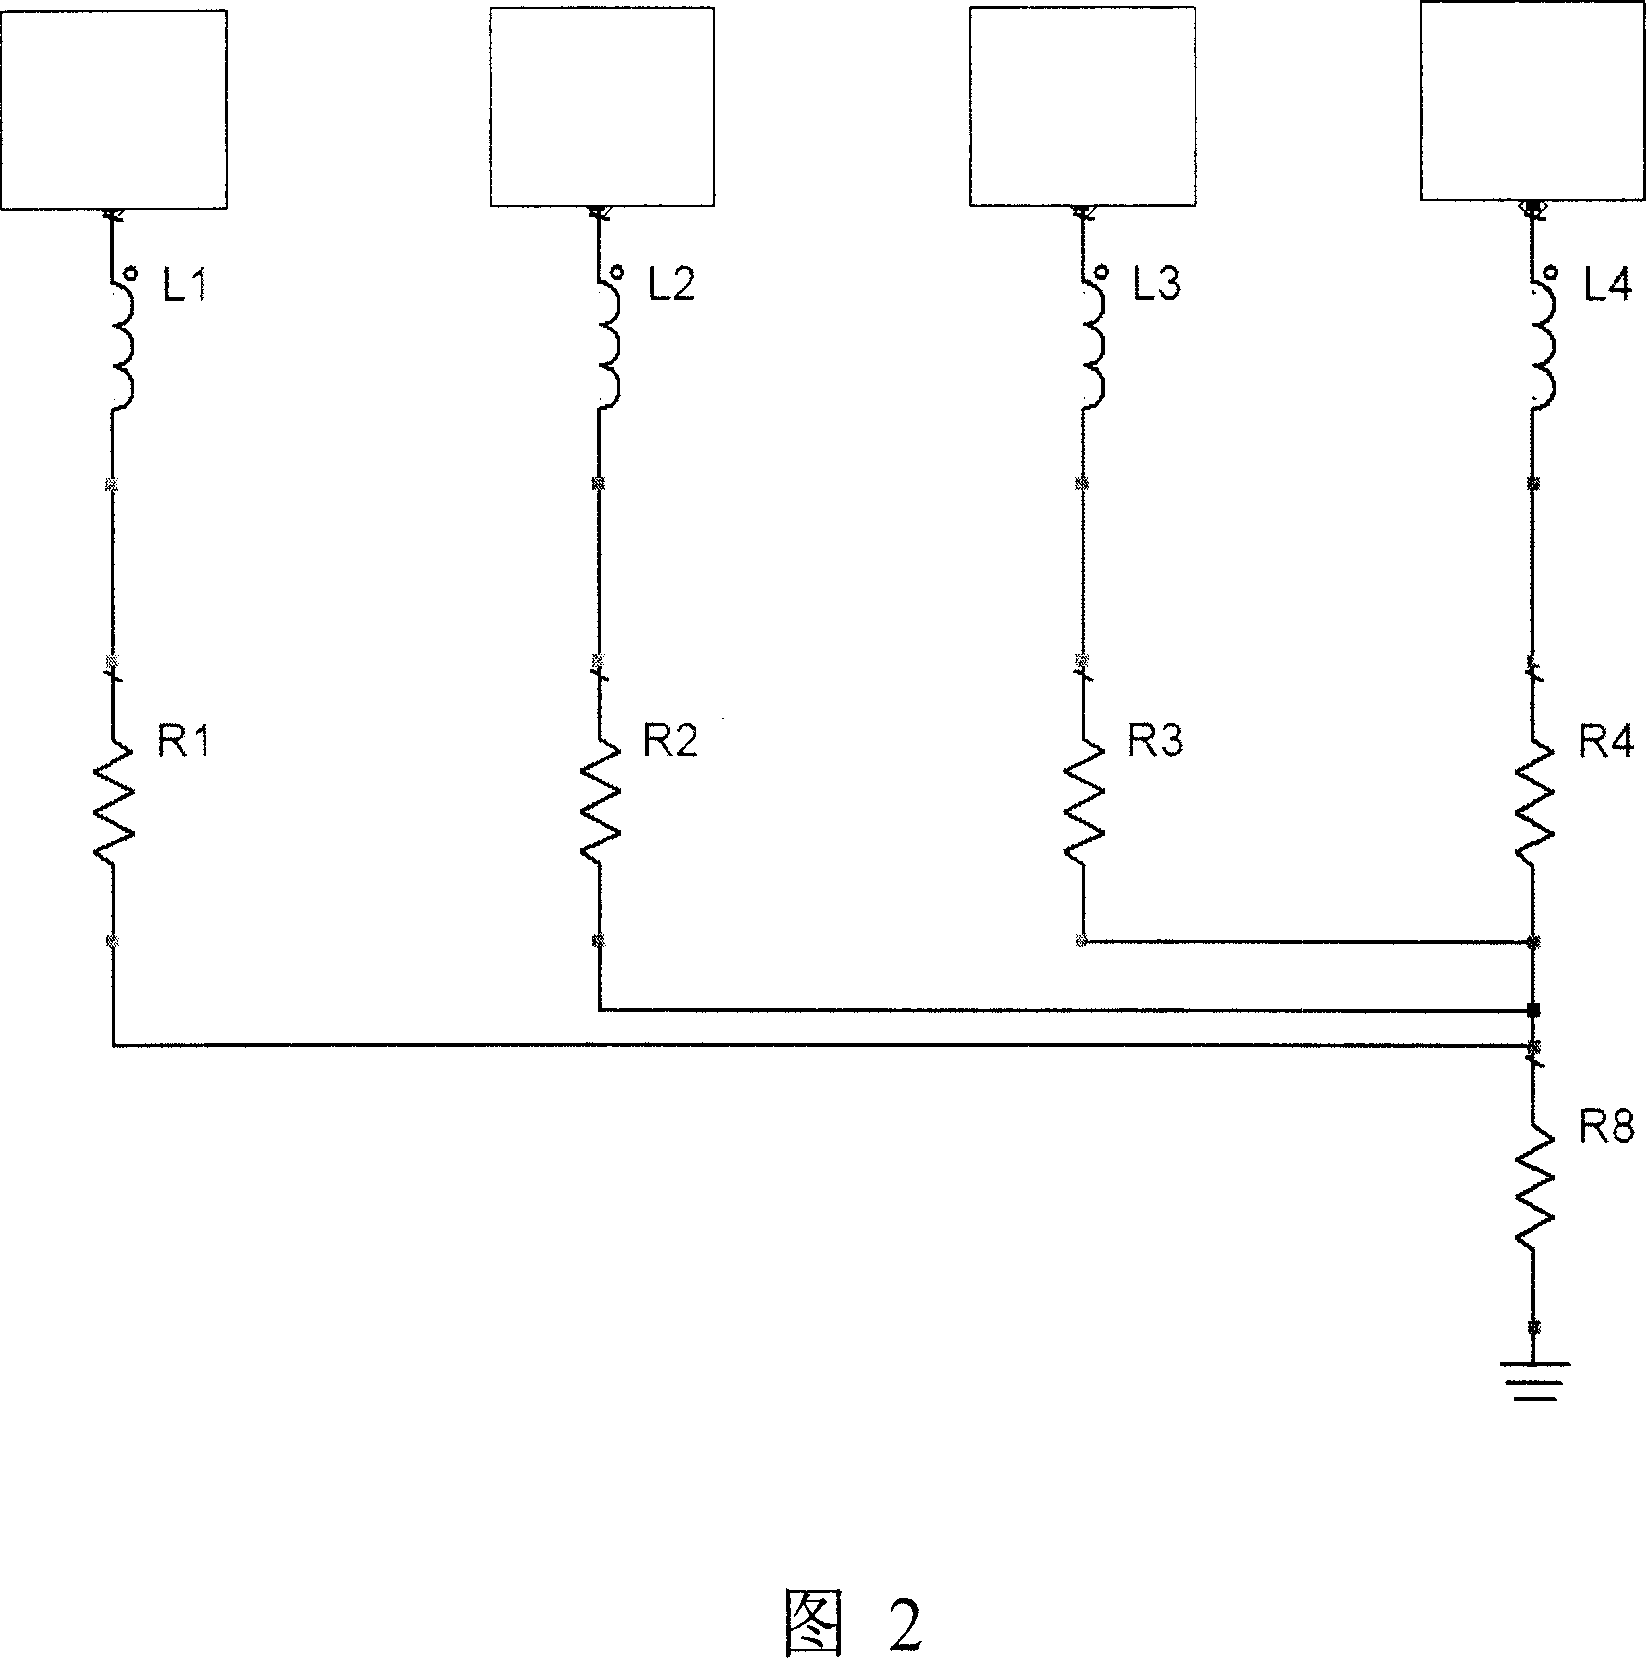 Ground wire layout graph for reducing microwave single-sheet integrated circuit standing wave ratio